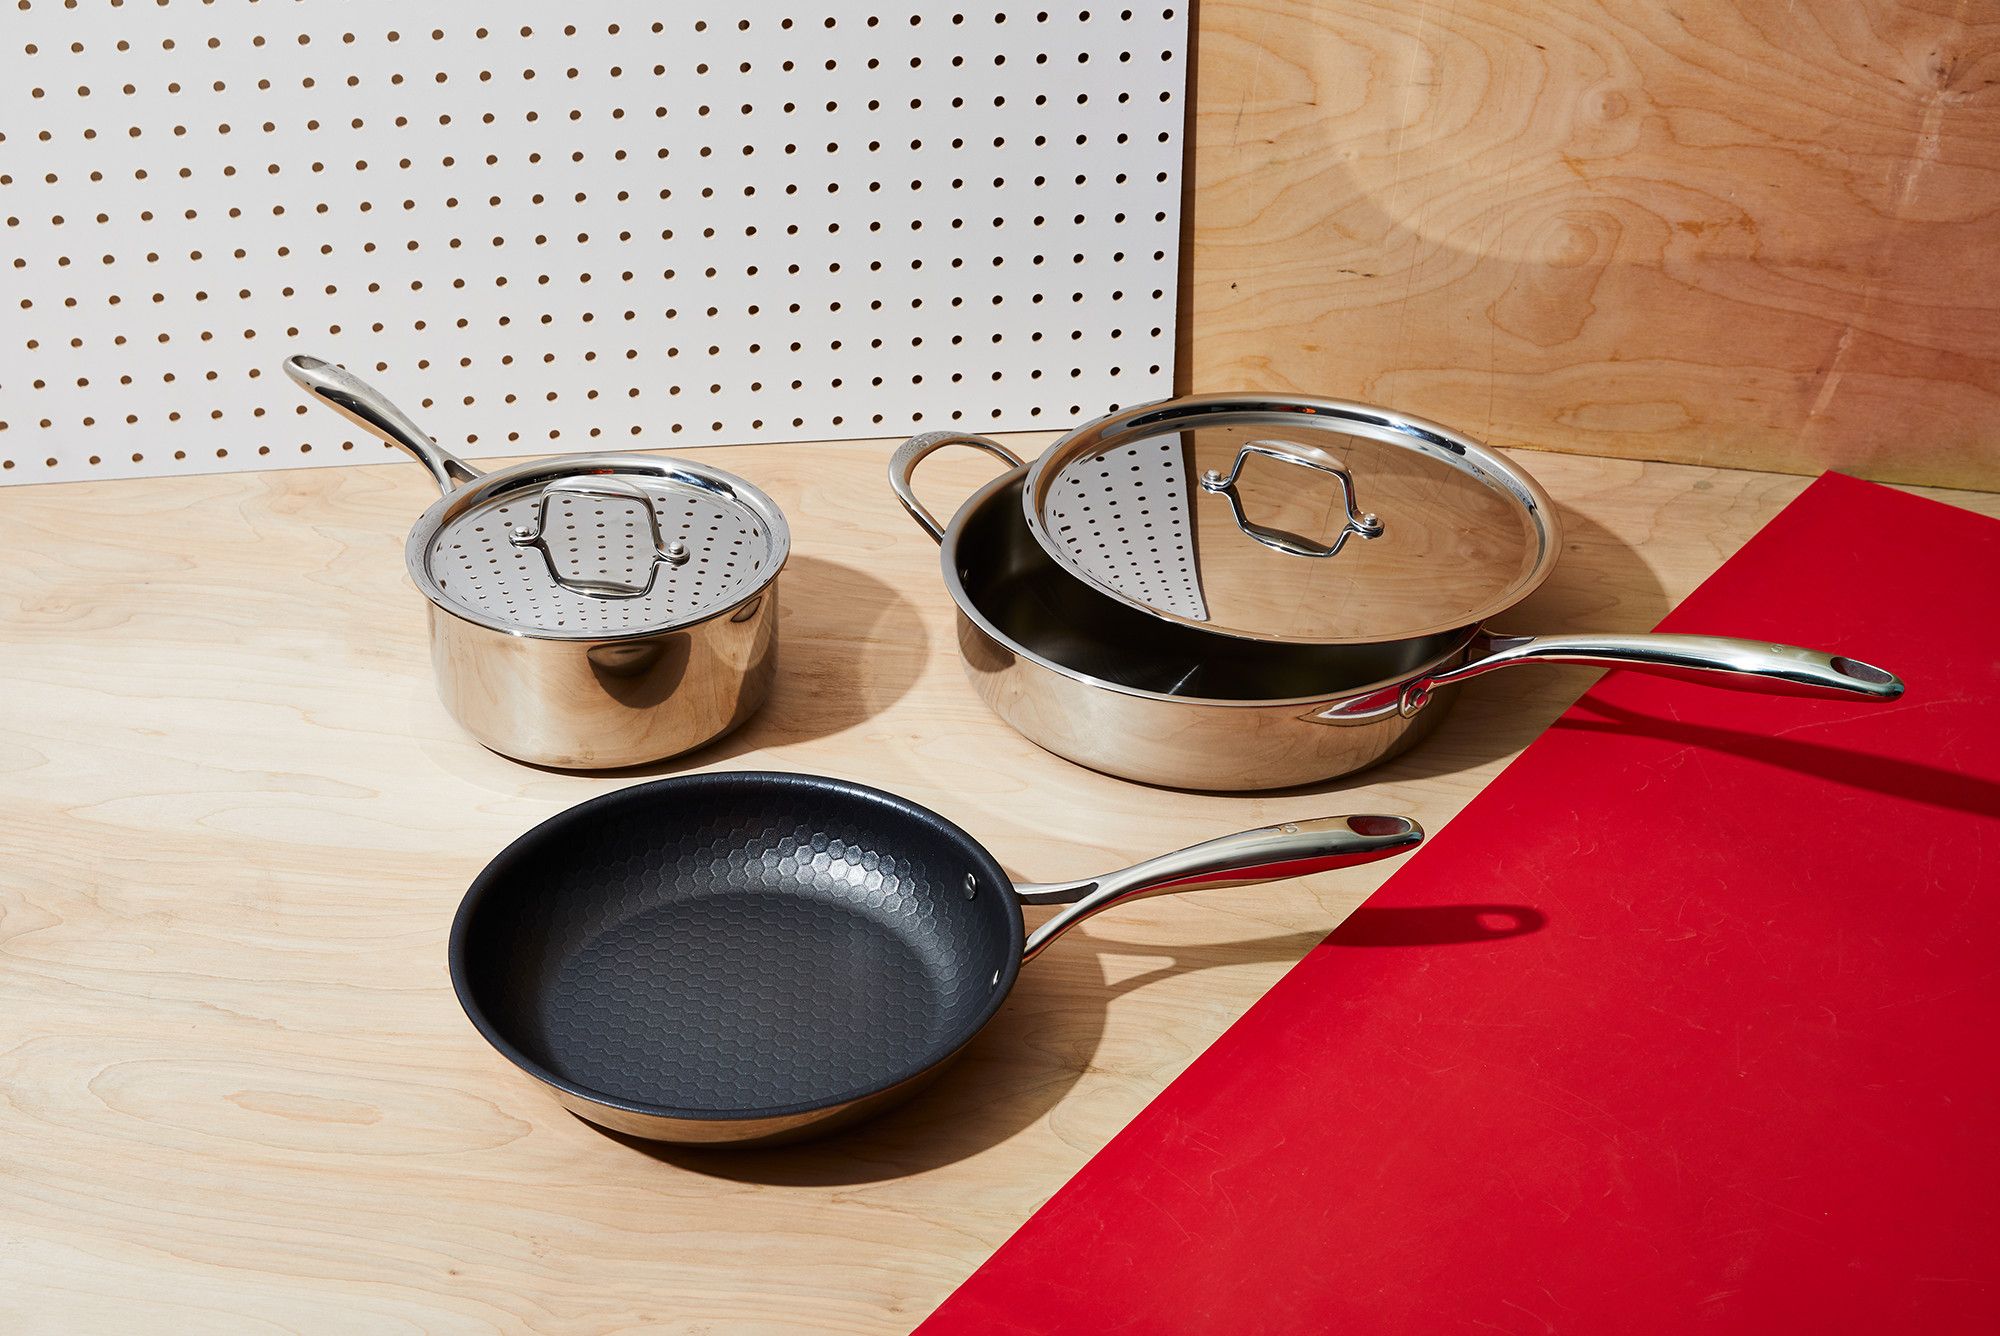 Sardel: Cookware You Can Count On